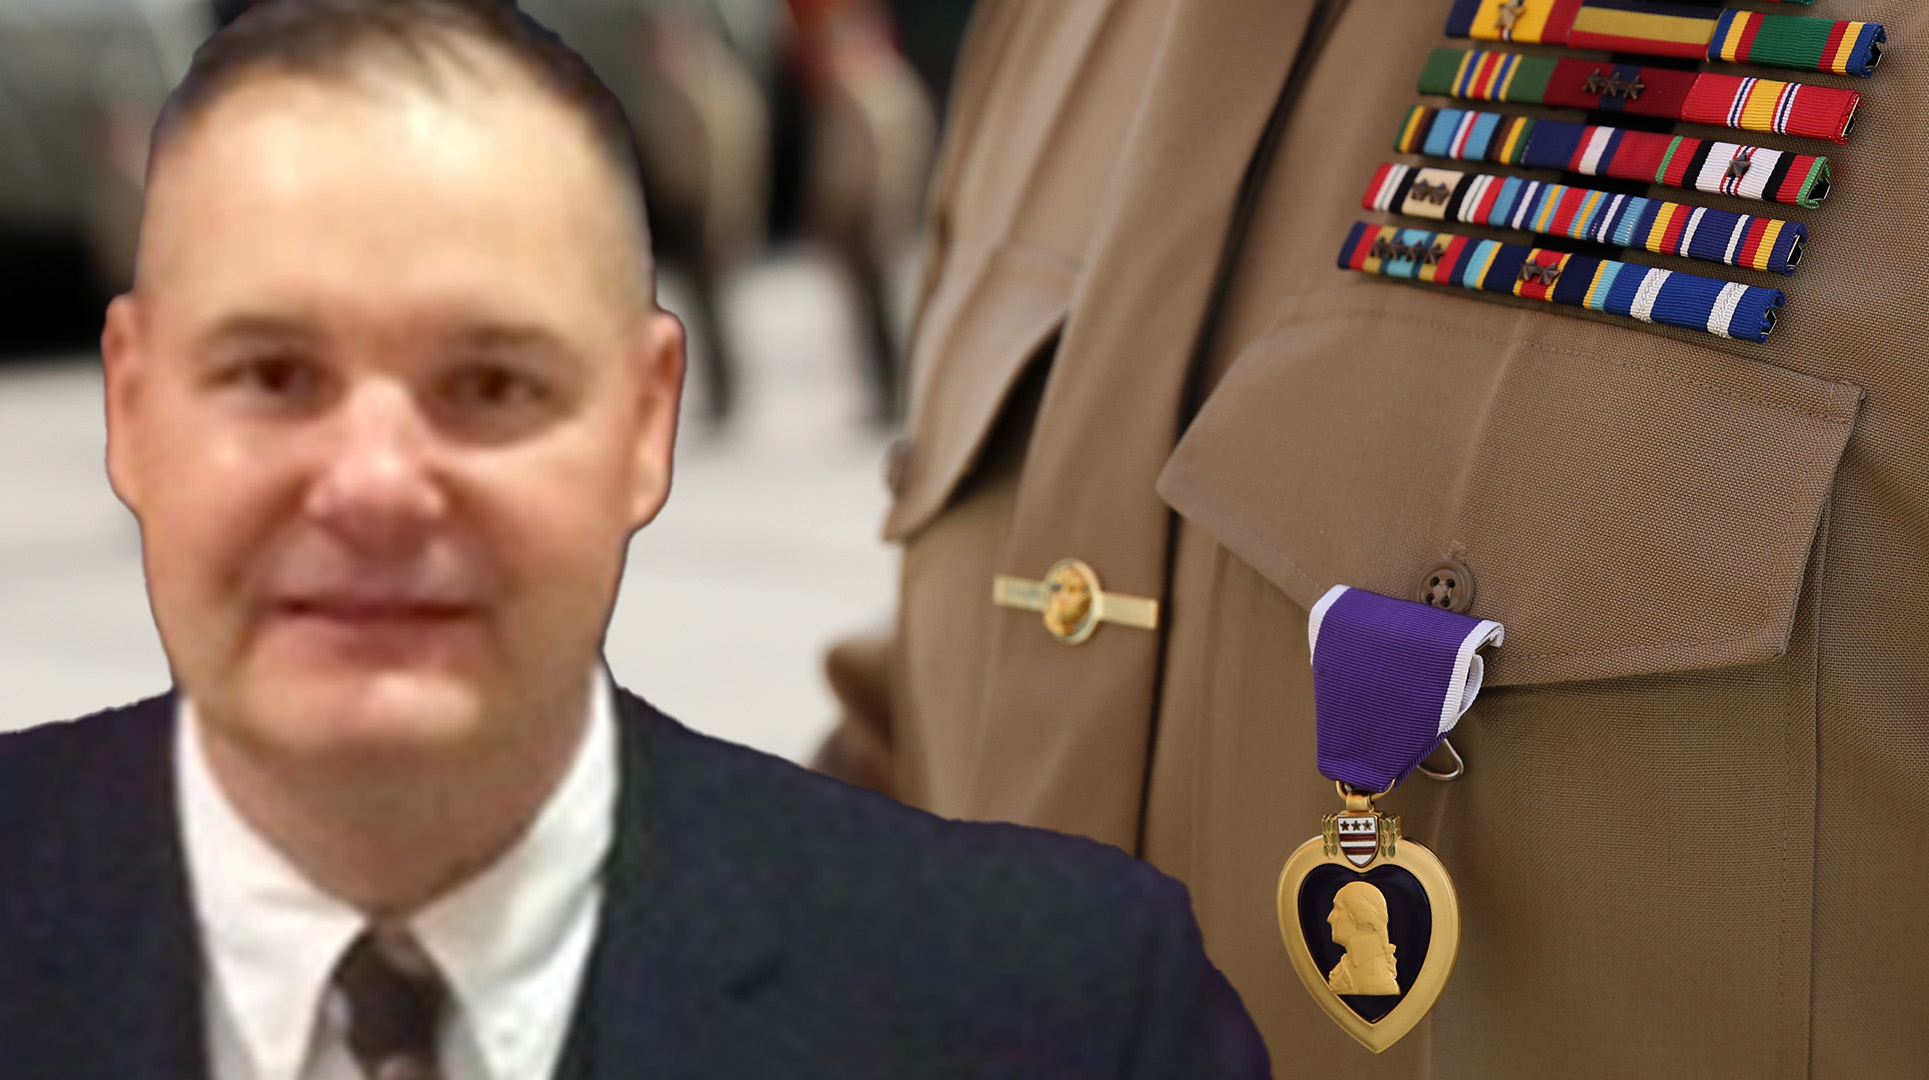 Paul John Herbert is accused of falsely claiming to have been wounded in Iraq after the 1991 Gulf War to collect more than $344,000 in veterans disability benefits and apply for a Purple Heart. (USMC Photo by Lance Cpl. Joey Mendez, Herbert photo from Linkedin)